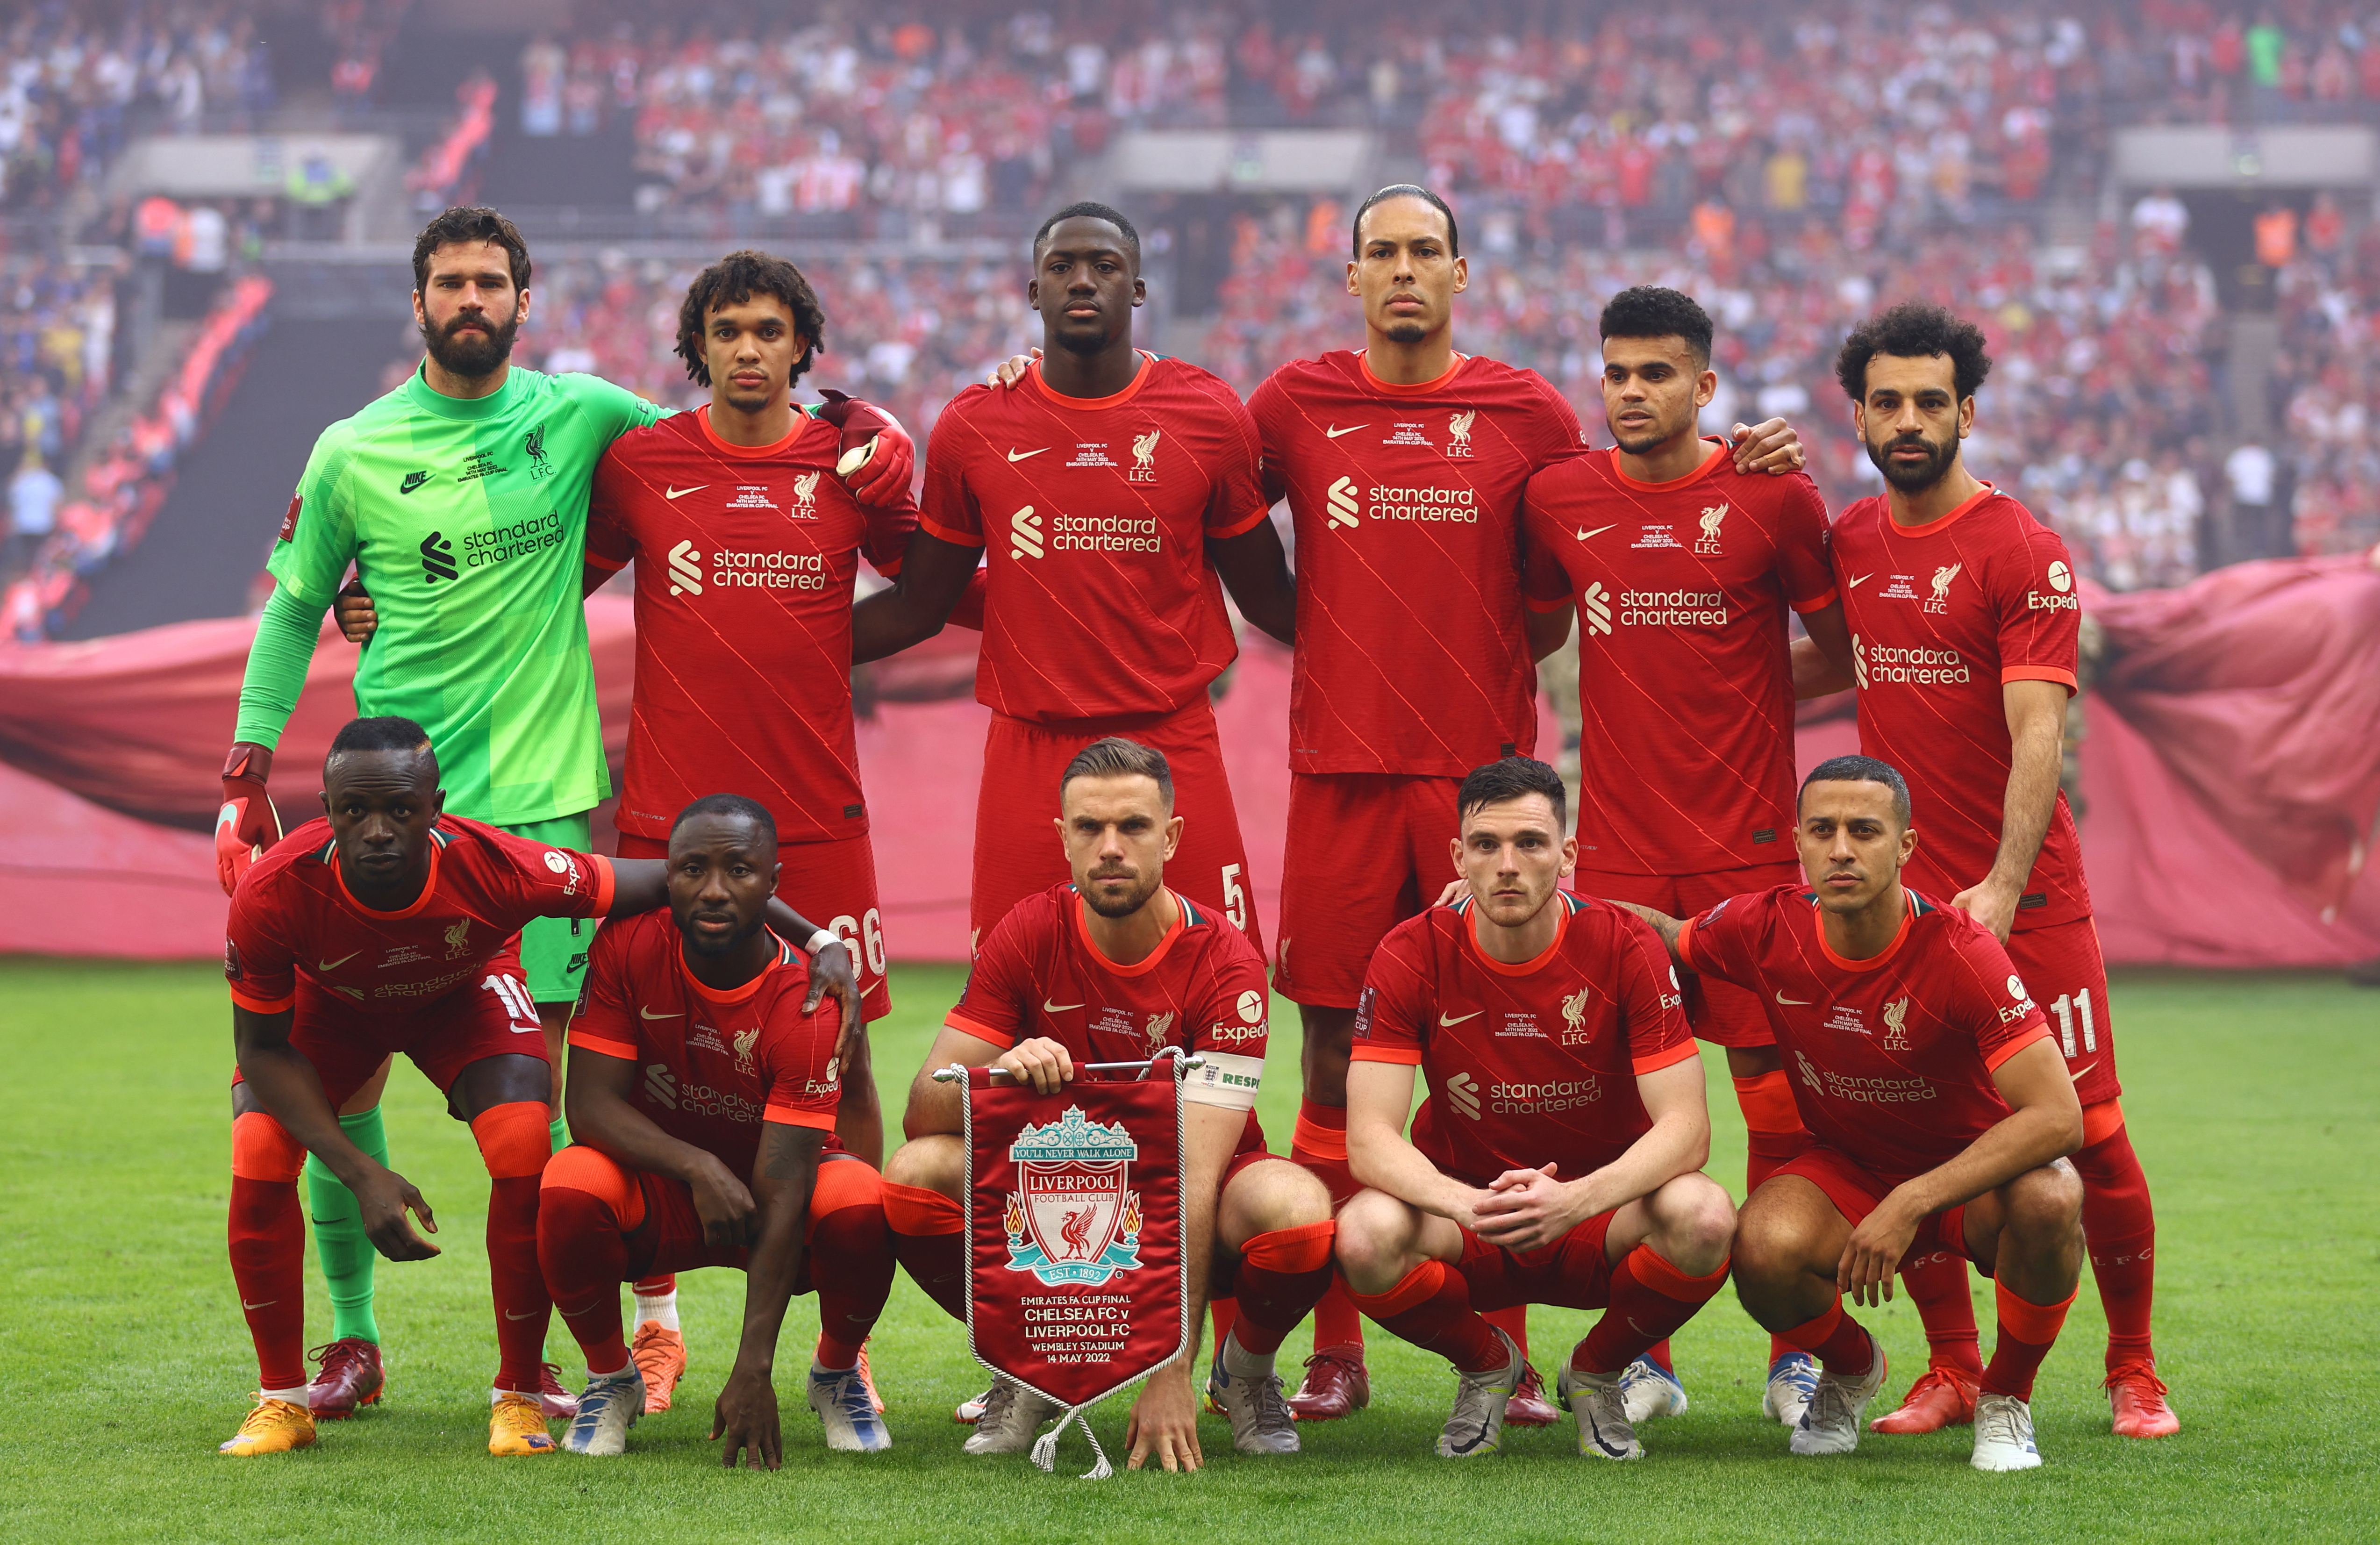 Soccer Football - FA Cup - Final - Chelsea v Liverpool - Wembley Stadium, London, Britain - May 14, 2022 Liverpool players pose for a team group photo before the match REUTERS/Hannah Mckay